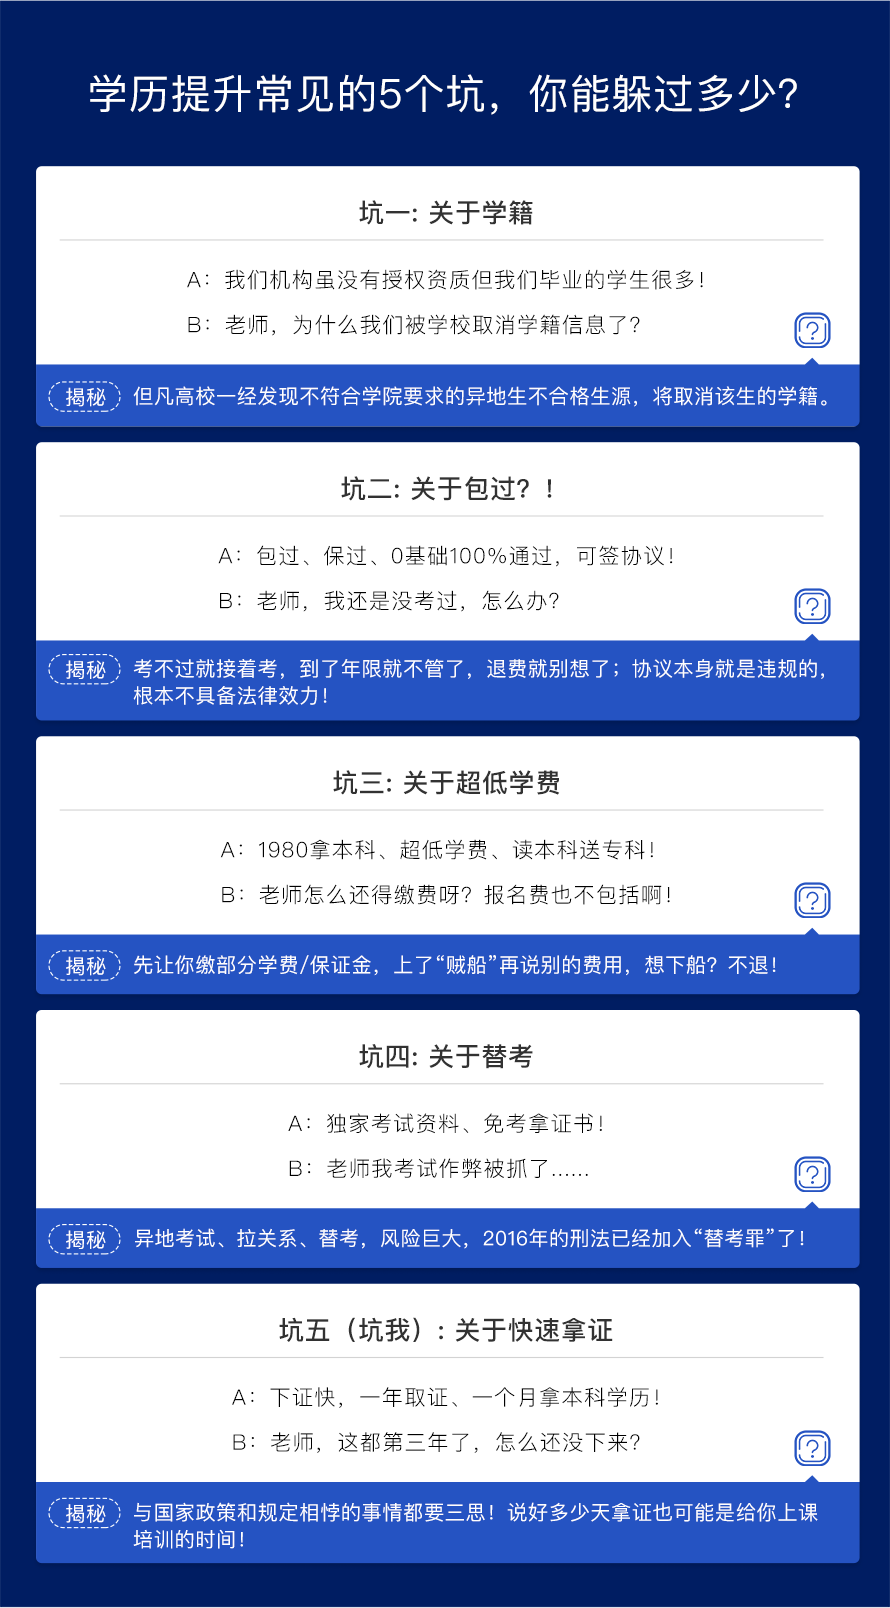 http://www.open.com.cn/product/img/product/common/05.jpg